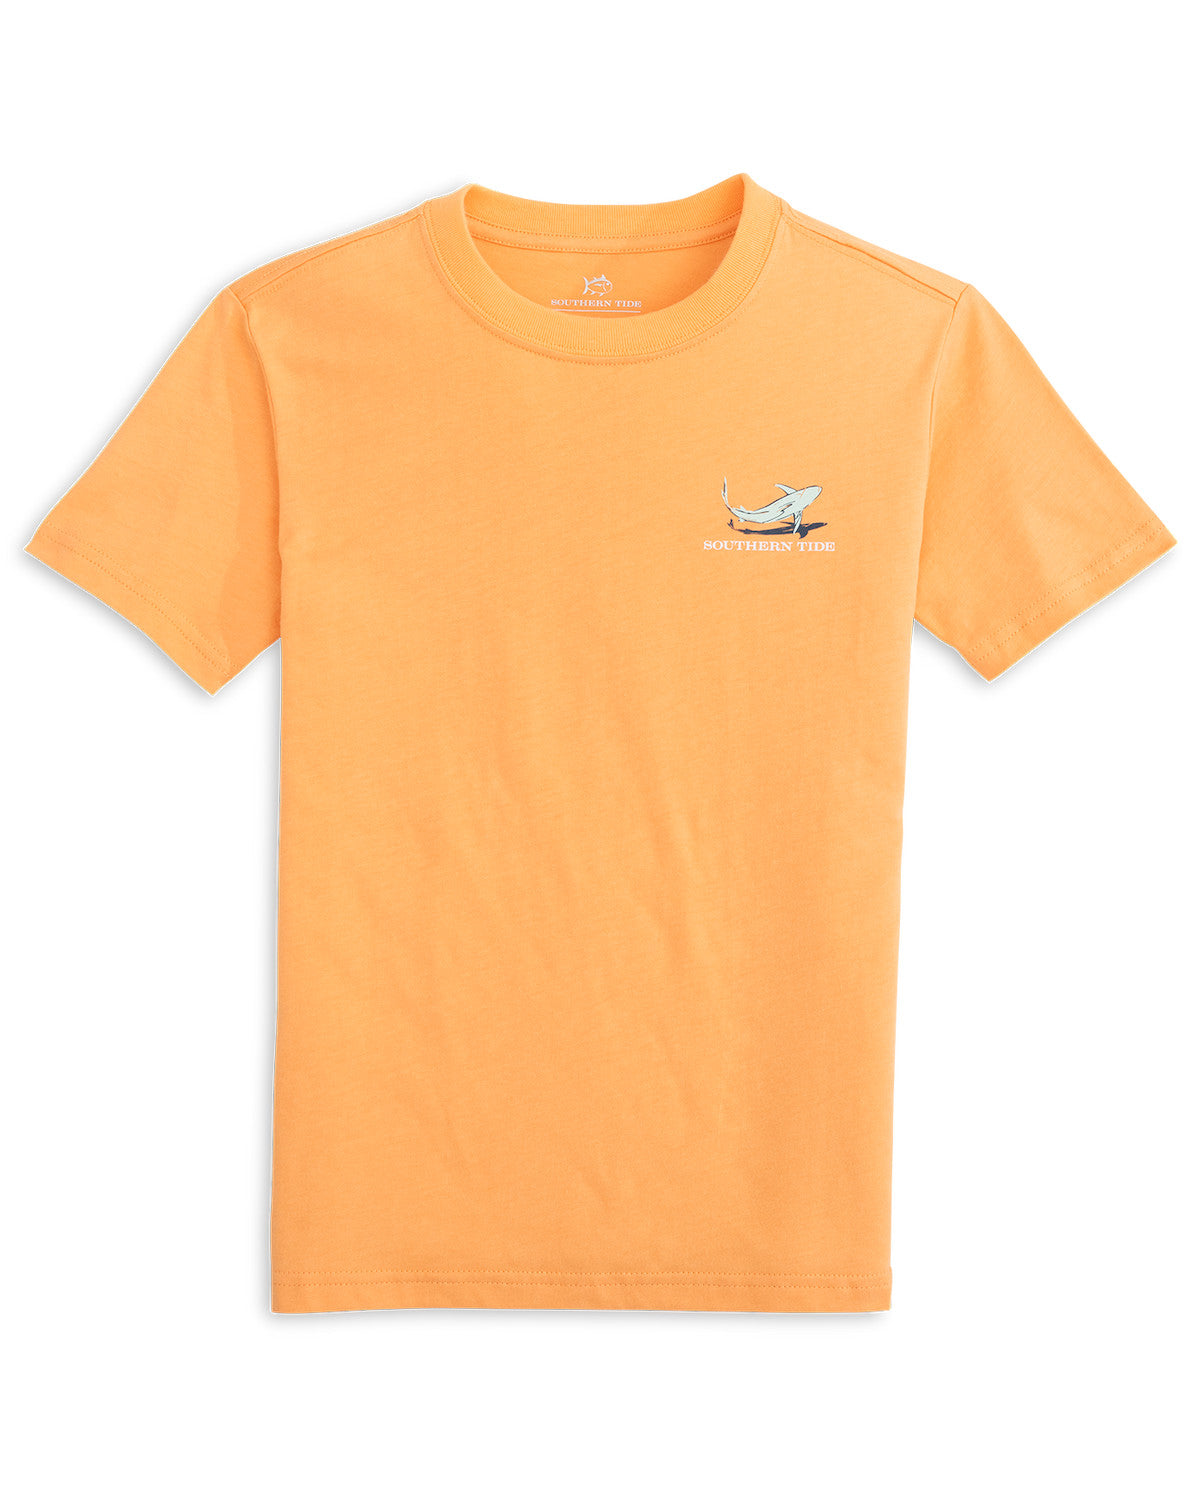 Southern Tide - Youth Yachts of Sharks Tee (Salmon Bluff Orange)